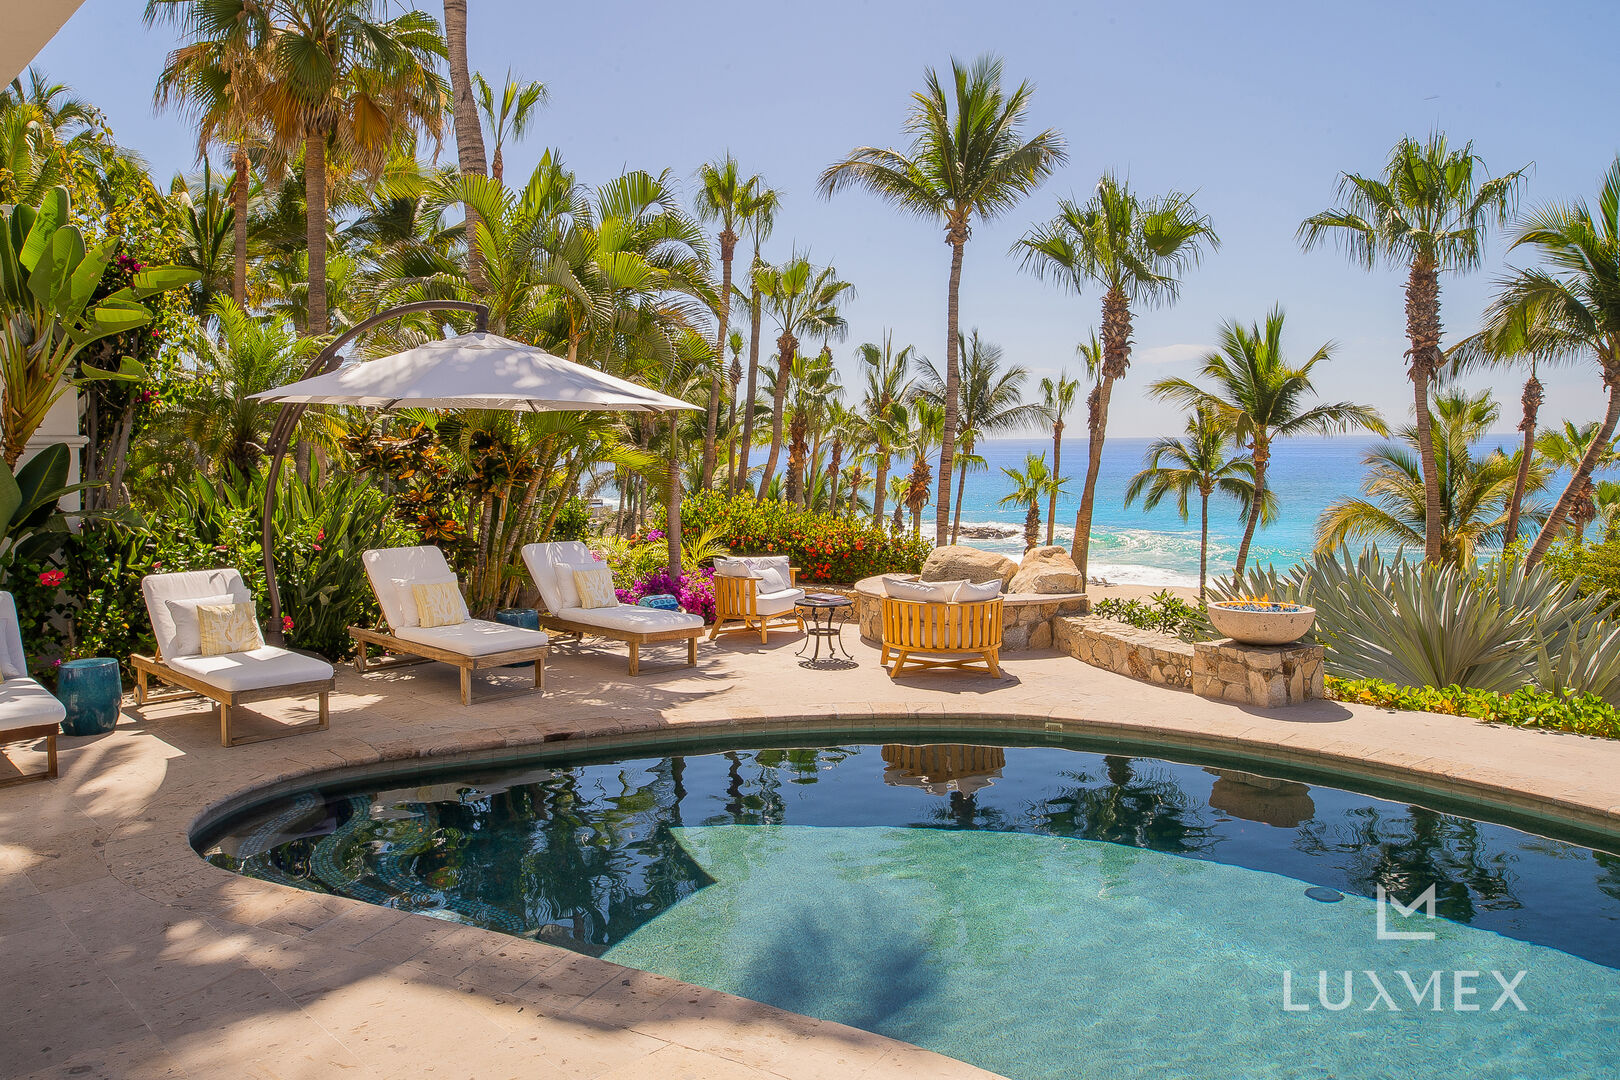 The lounge chairs and pool at the Villa Sirena in Los Cabos